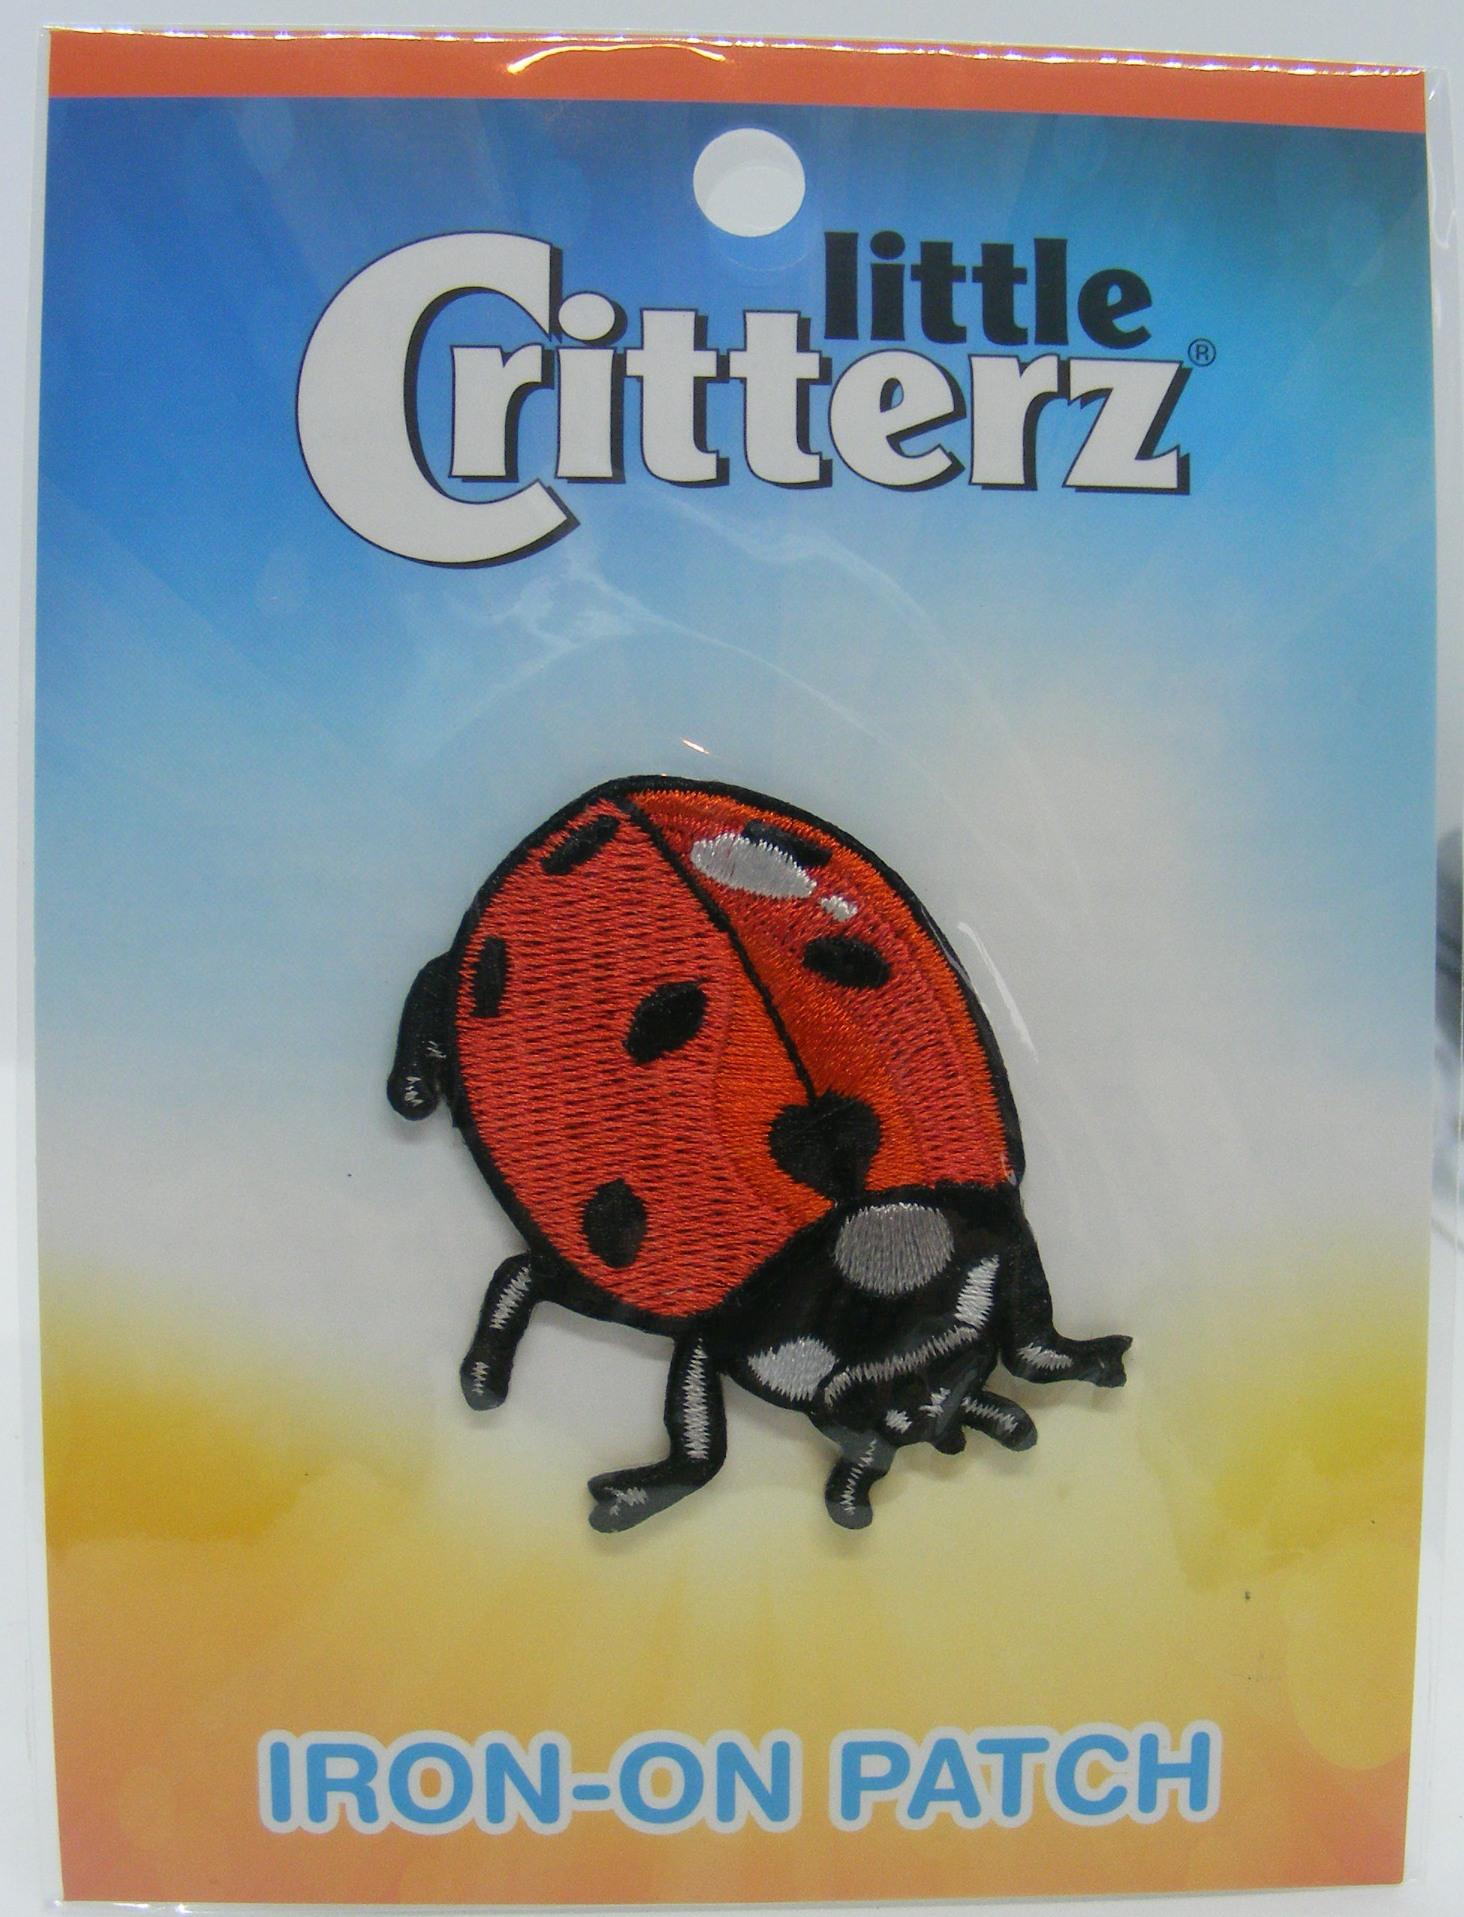 LCPA251443 Ladybird Little Critterz Embroidered Iron-on Animal Patch Ladybug